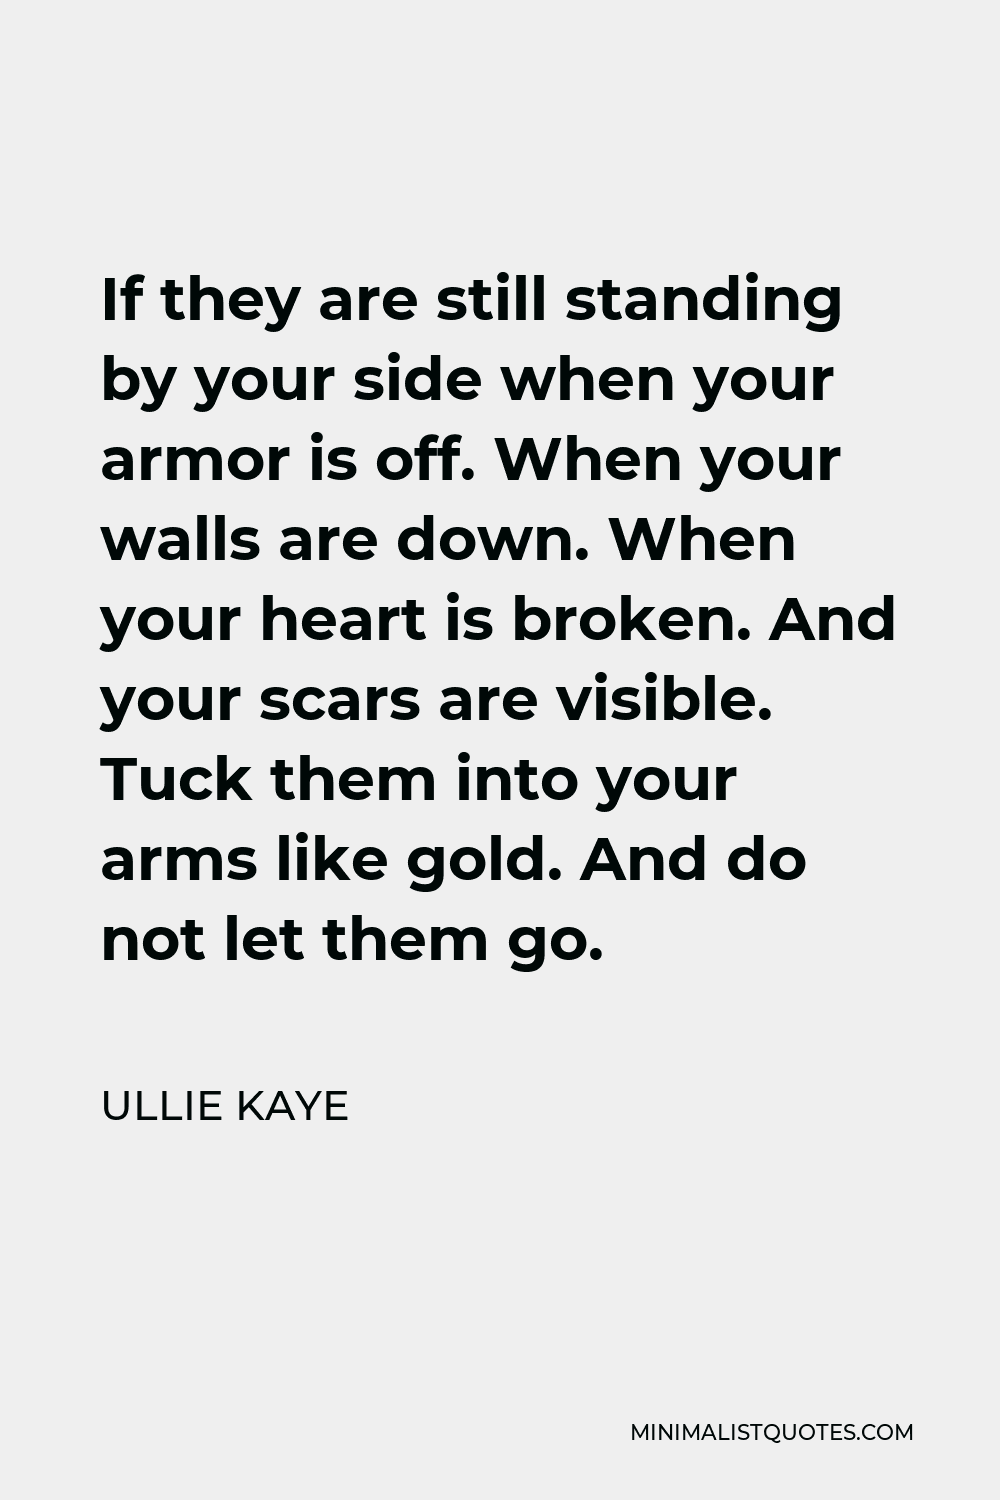 Ullie Kaye Quote - If they are still standing by your side when your armor is off. When your walls are down. When your heart is broken. And your scars are visible. Tuck them into your arms like gold. And do not let them go.